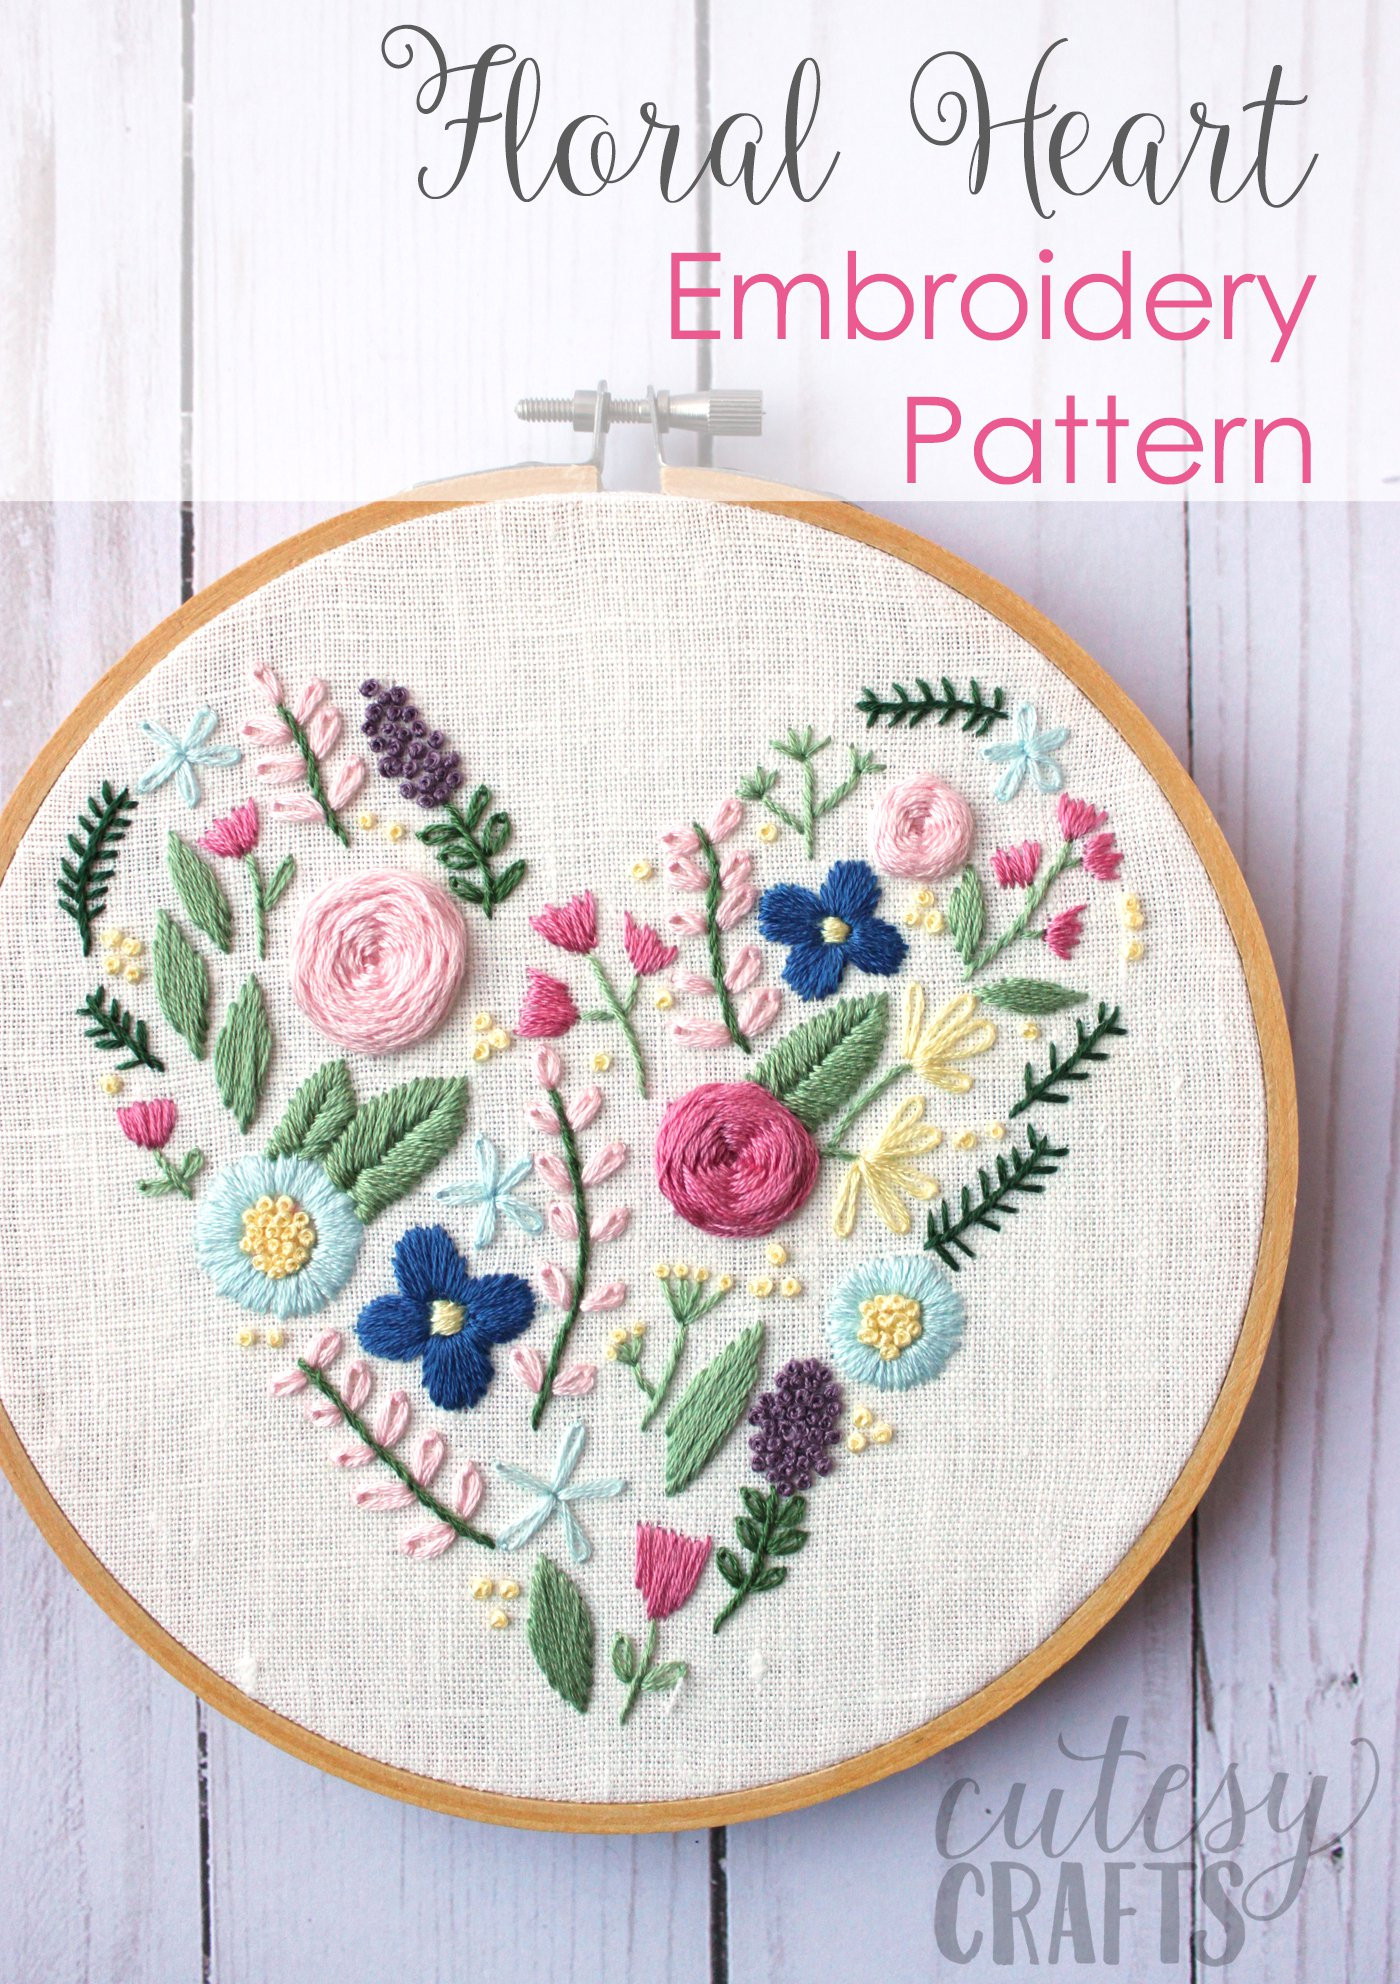 How To Design Embroidery Patterns Floral Heart Hand Embroidery Pattern The Polka Dot Chair